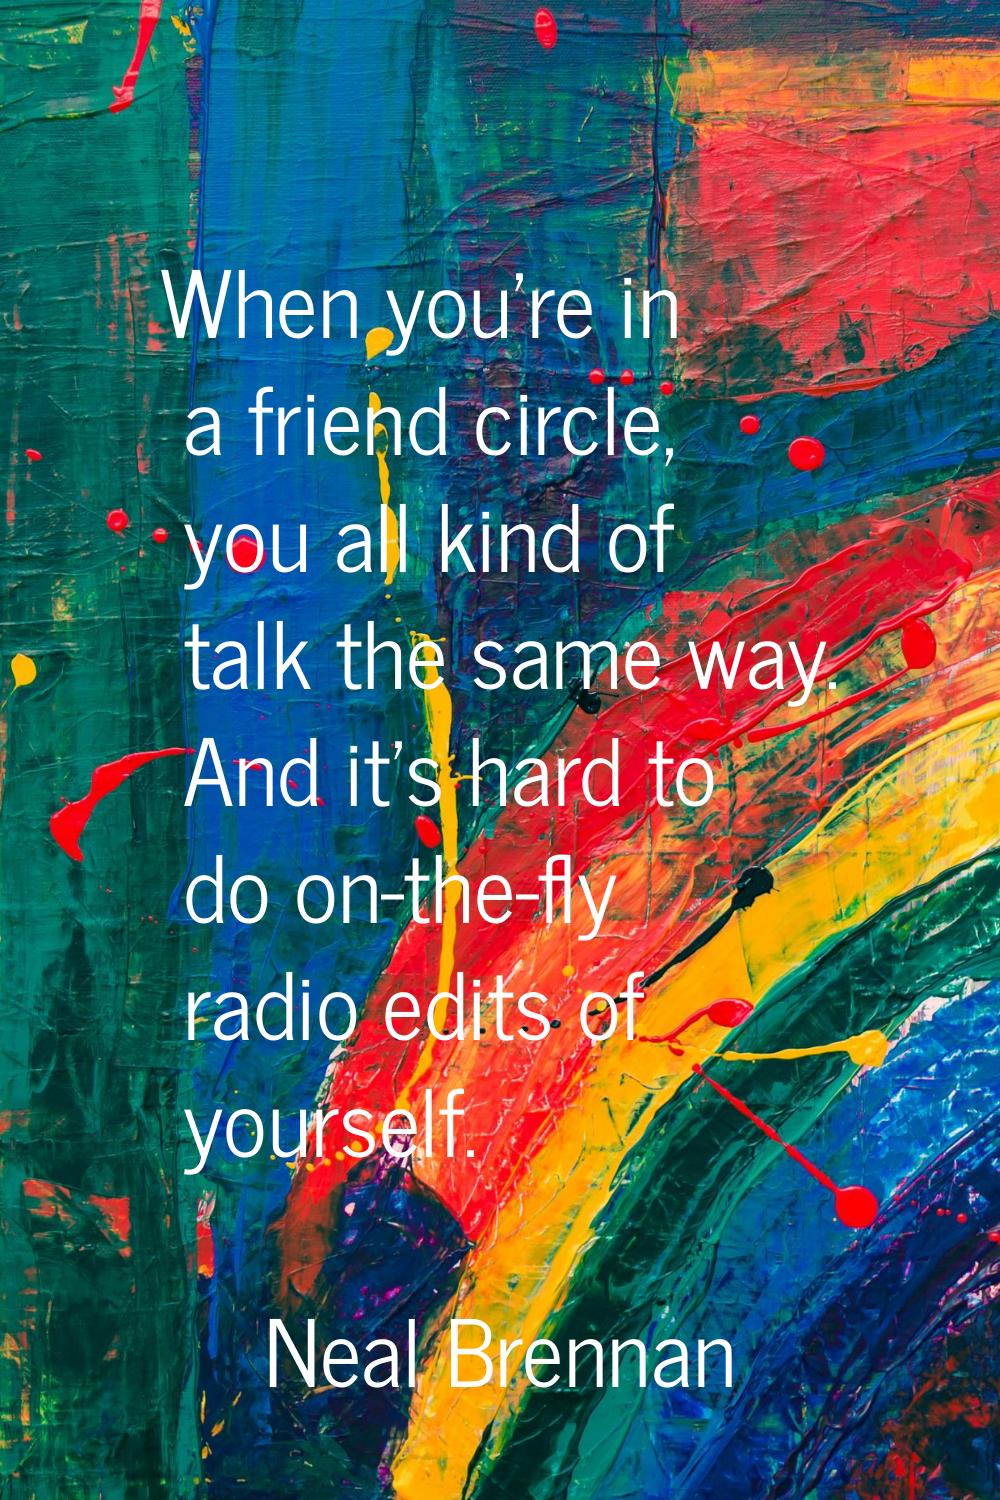 When you're in a friend circle, you all kind of talk the same way. And it's hard to do on-the-fly r